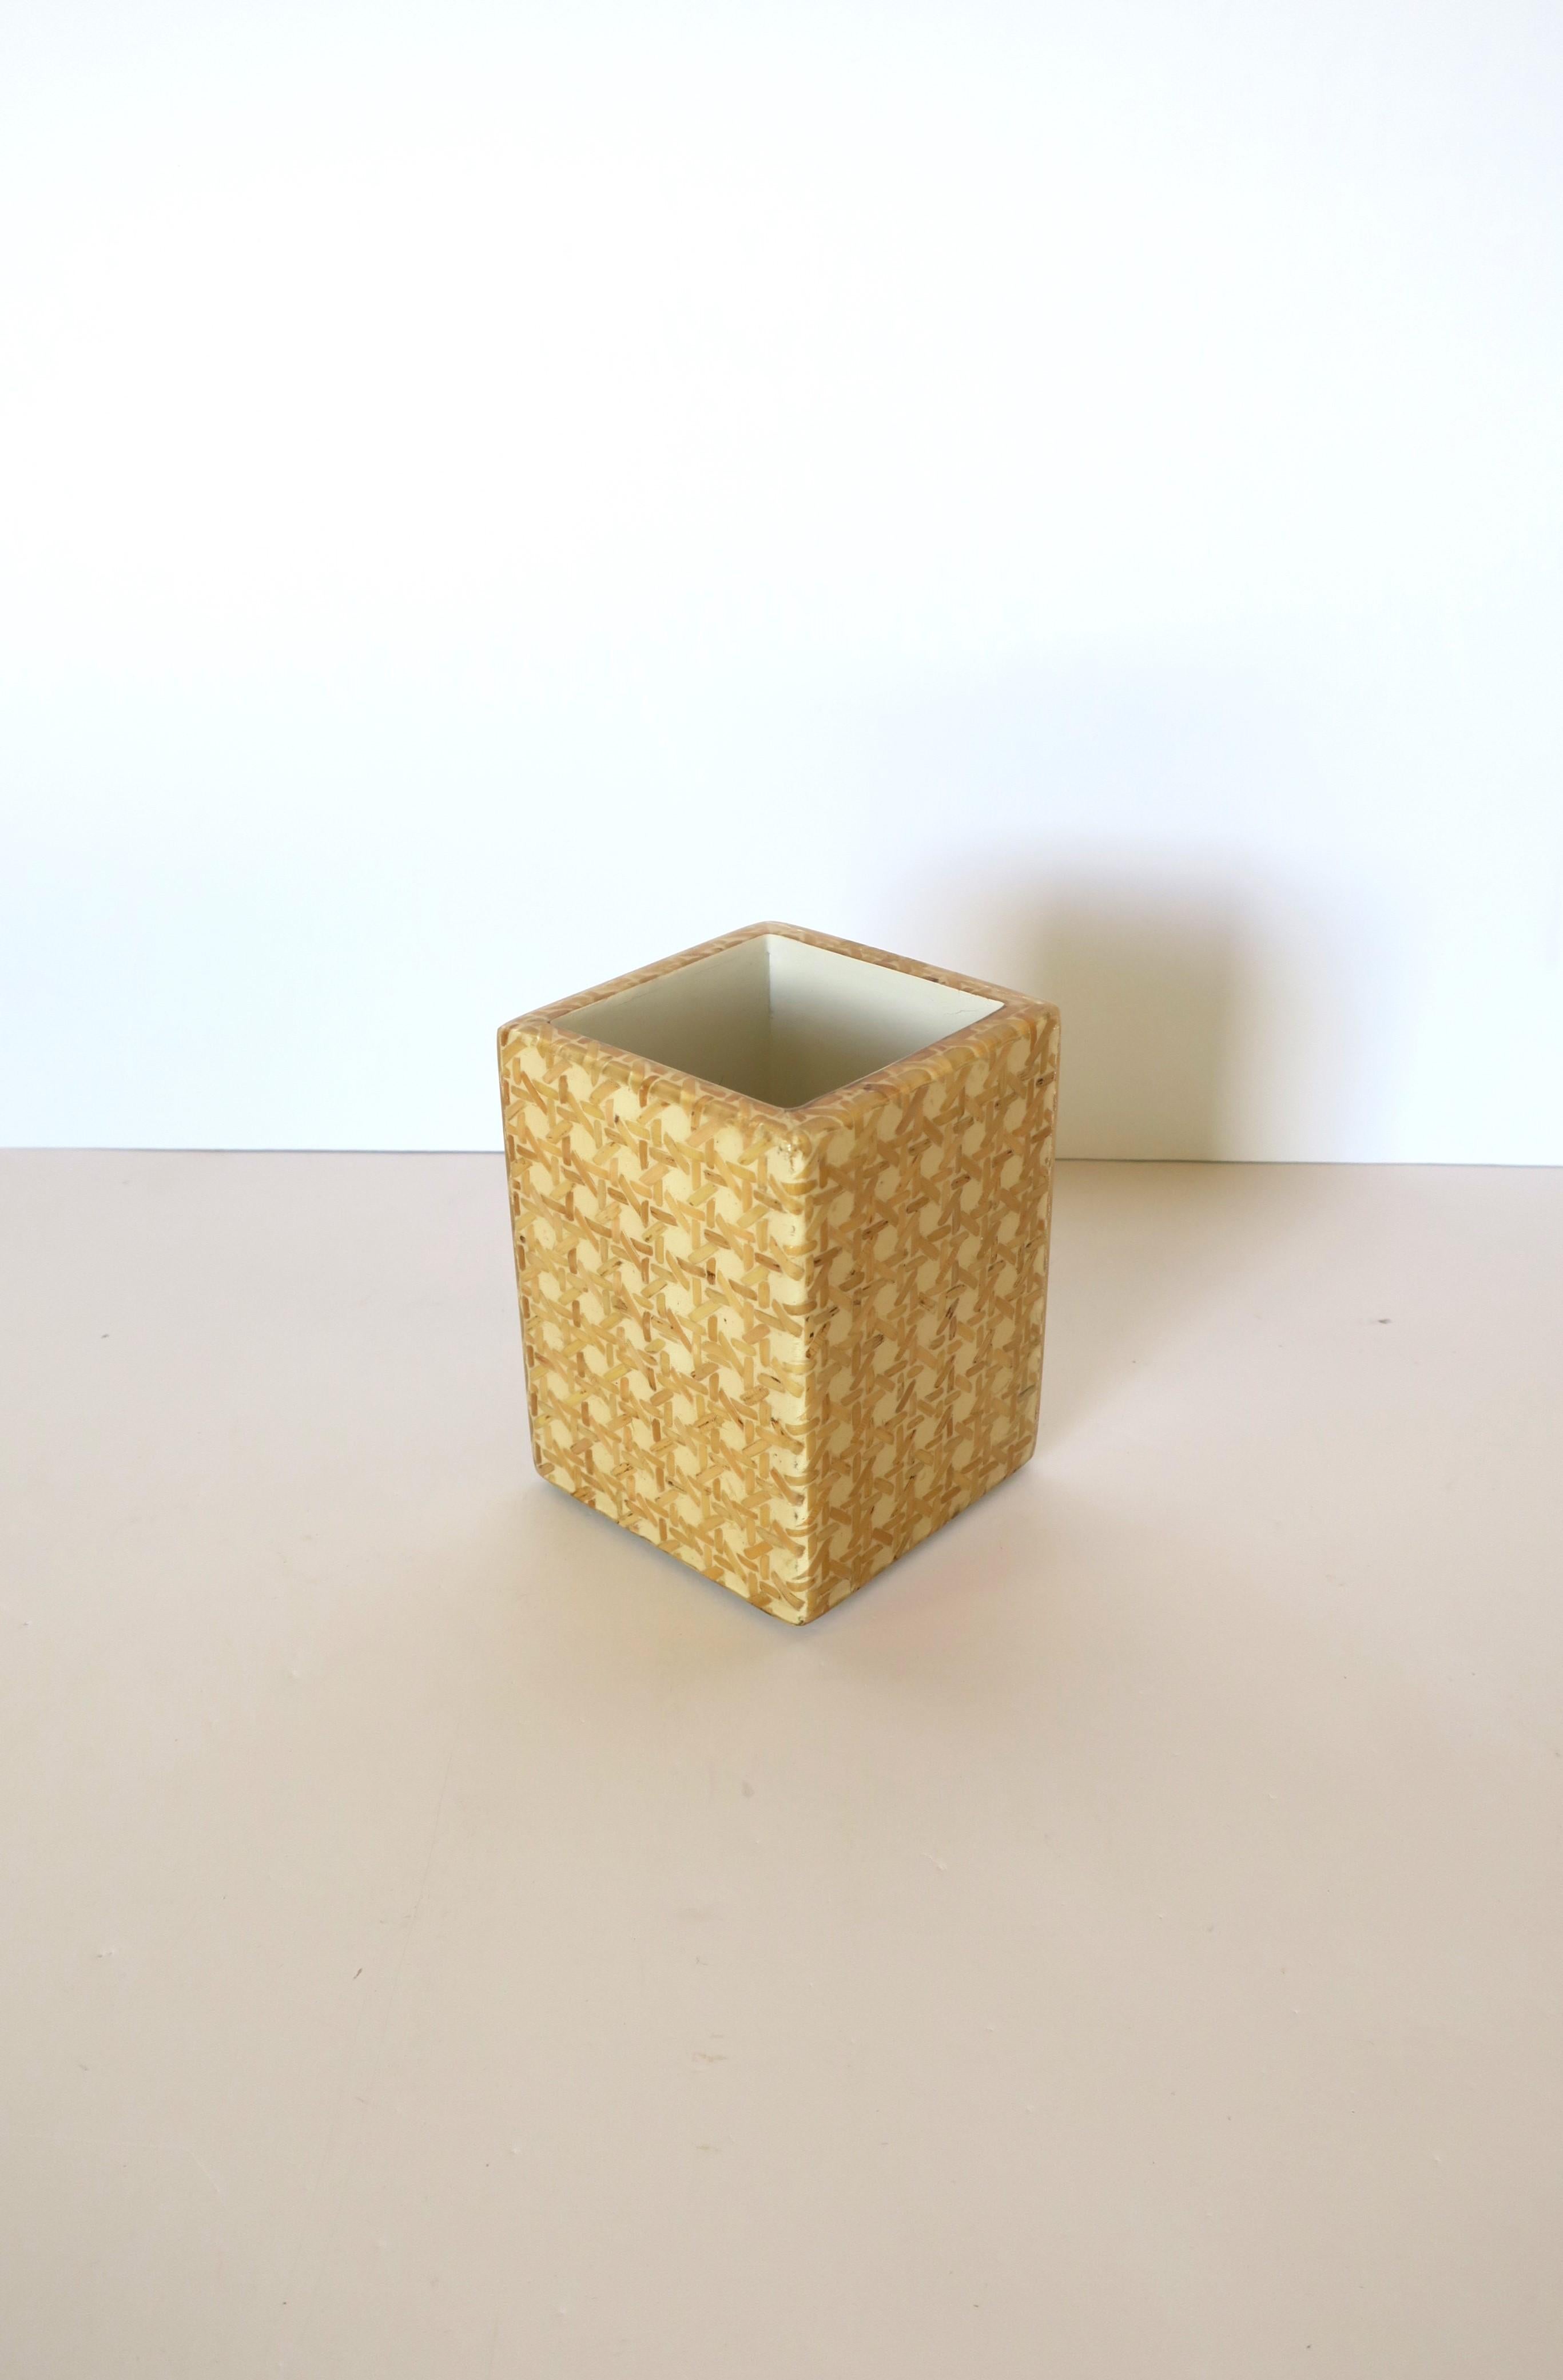 A wicker cane acrylic bathroom vanity toothbrush or pen/pencil desk accessory holder. Piece is blonde cane wicker covered in clear acrylic. Piece appears to have never been used. A great piece for bathroom vanity area or desk (demonstrated holding